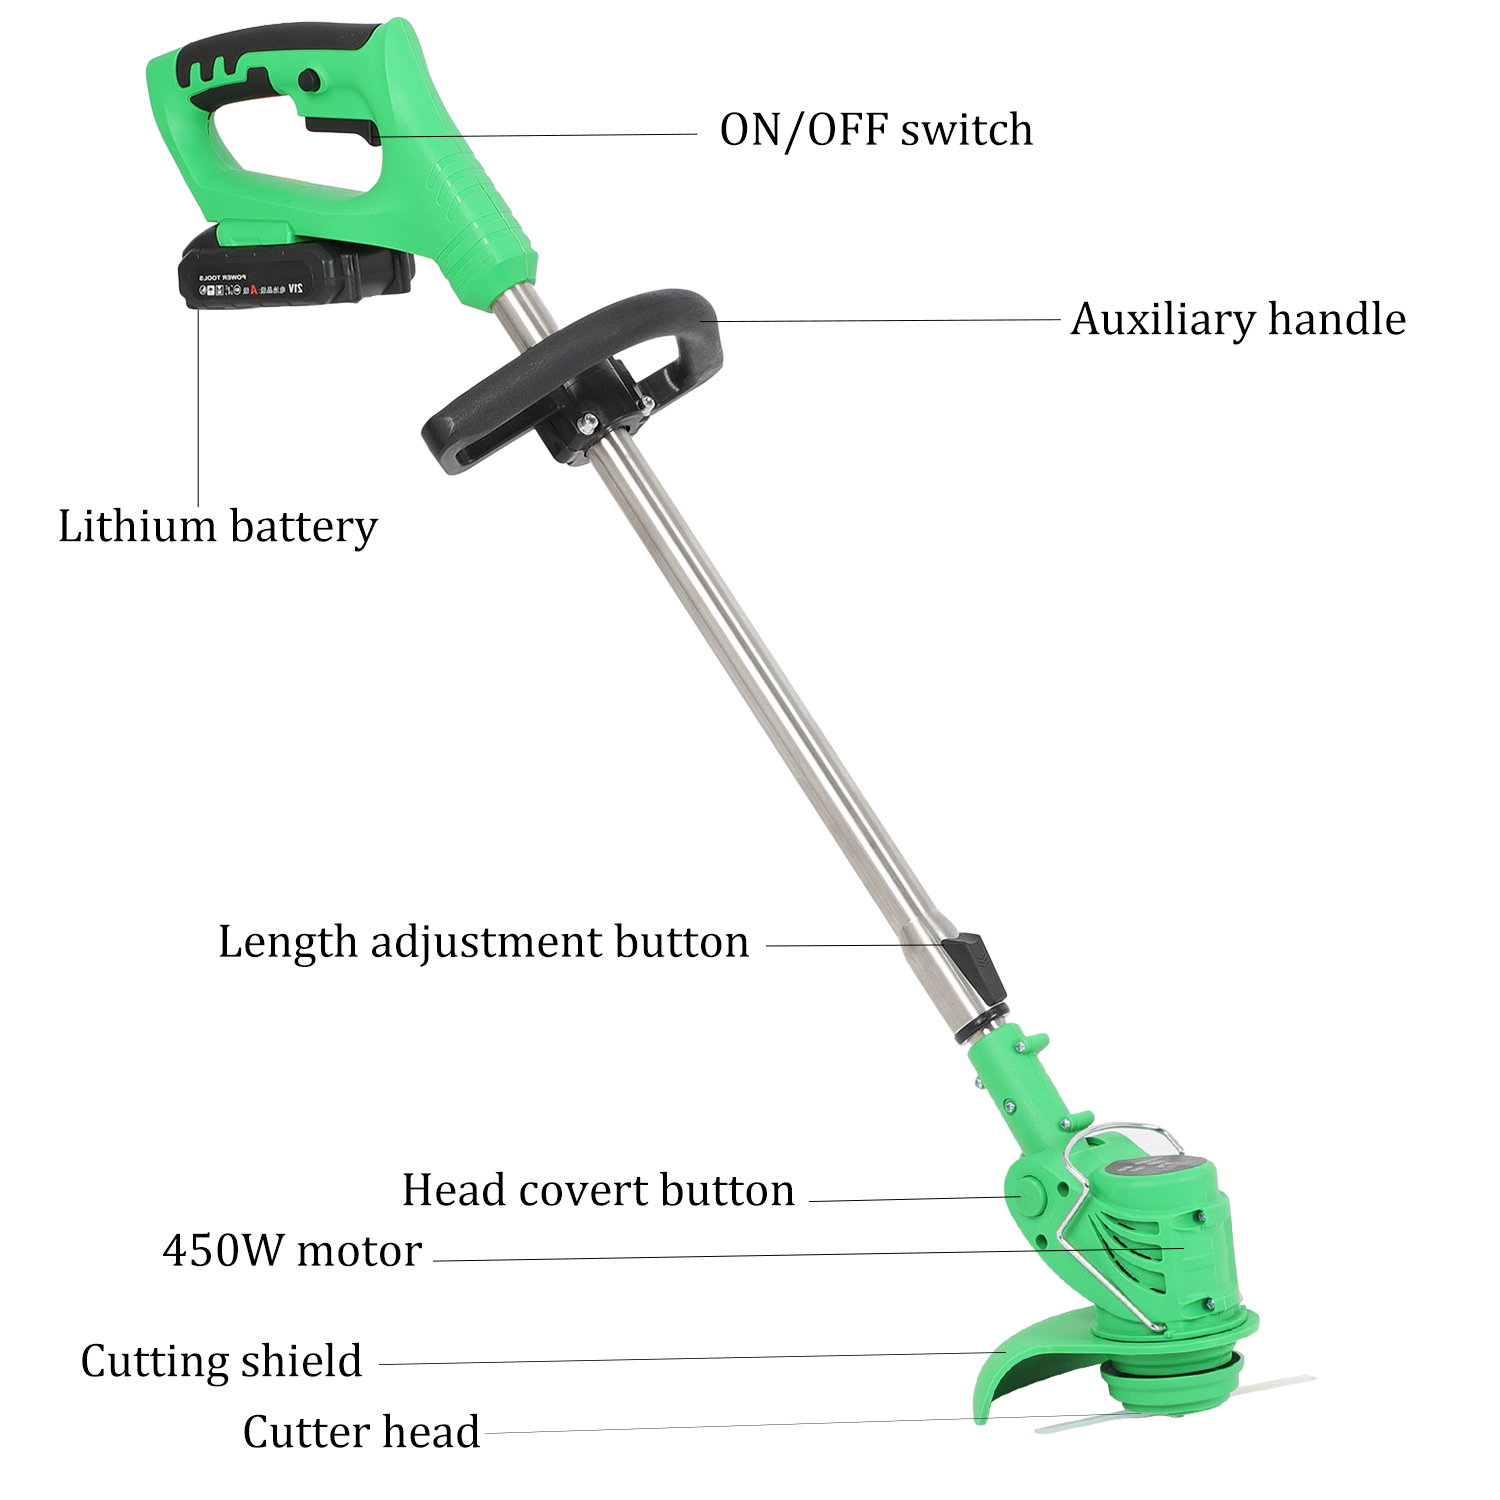 Electric Grass Trimmer Edger Lawn Mower 21V 3000mAh Lithium-Ion Cordless Weed Brush Cutter Kit Pruning Cutter Garden Tools